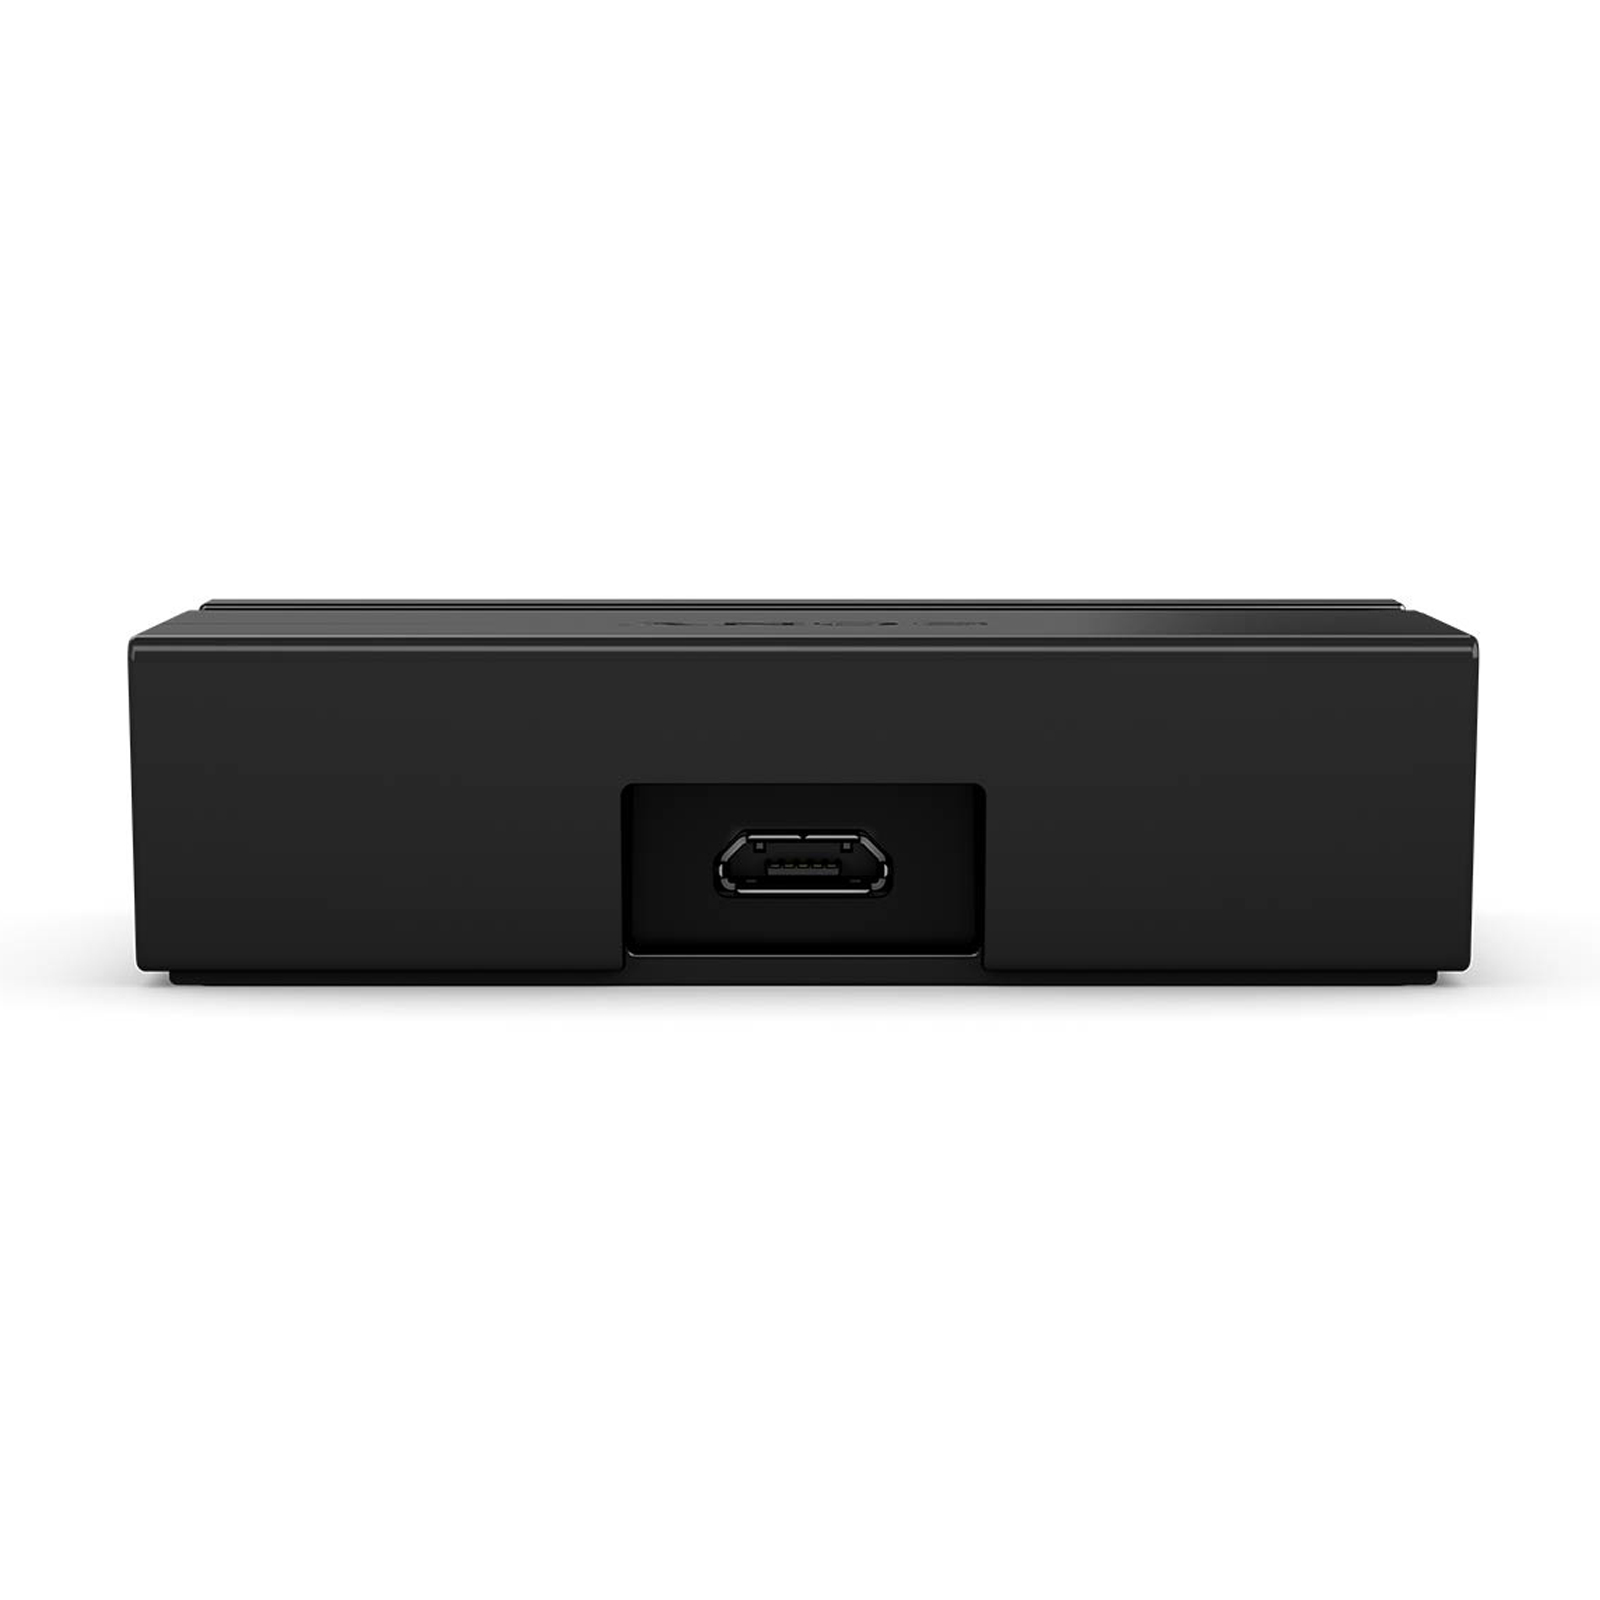 Official Sony Xperia Z2 Magnetic Charging Dock